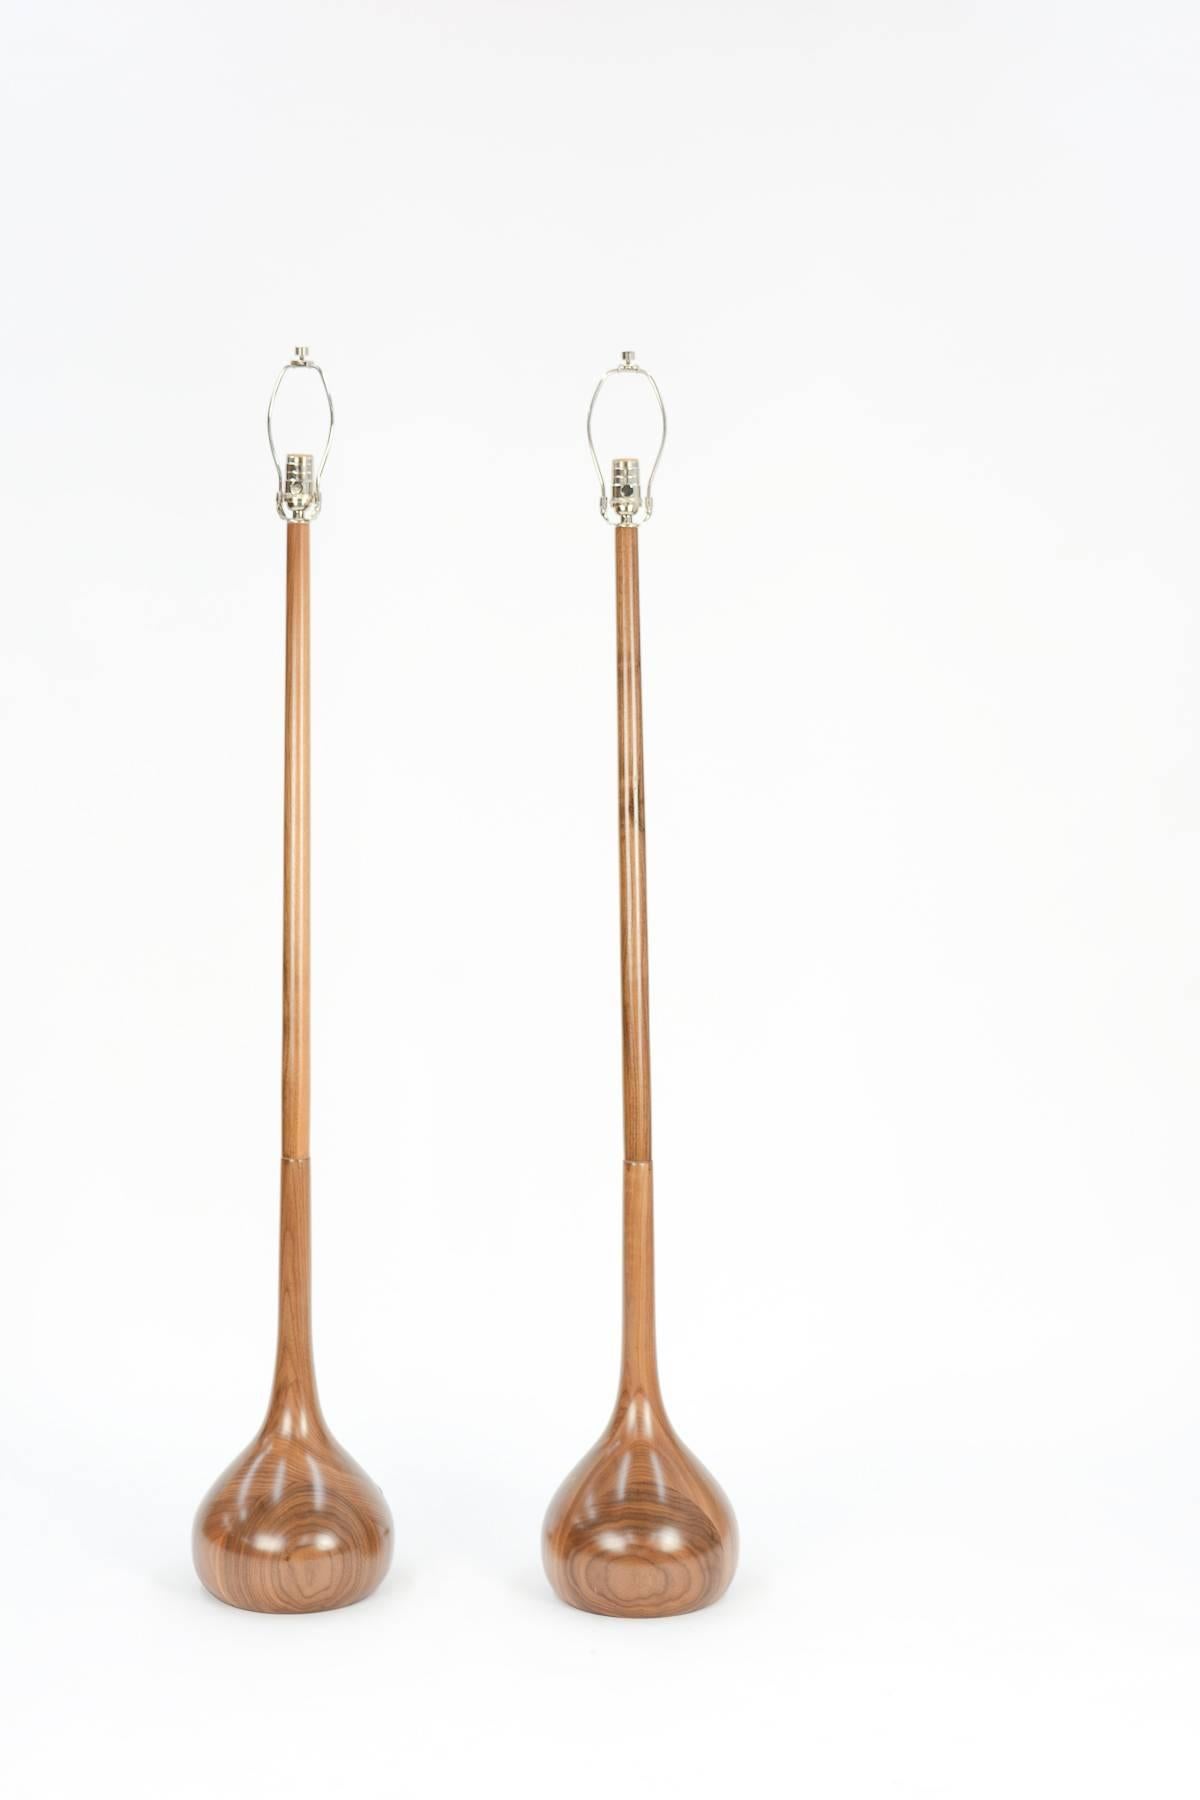 This pair of hand-carved European walnut tulip bulb floor lamps are the latest of 20th century Studio's own design work. The walnut grain patterns in these lamps is extraordinary, with graining unique to each lamp.

Please note: Lamp shades